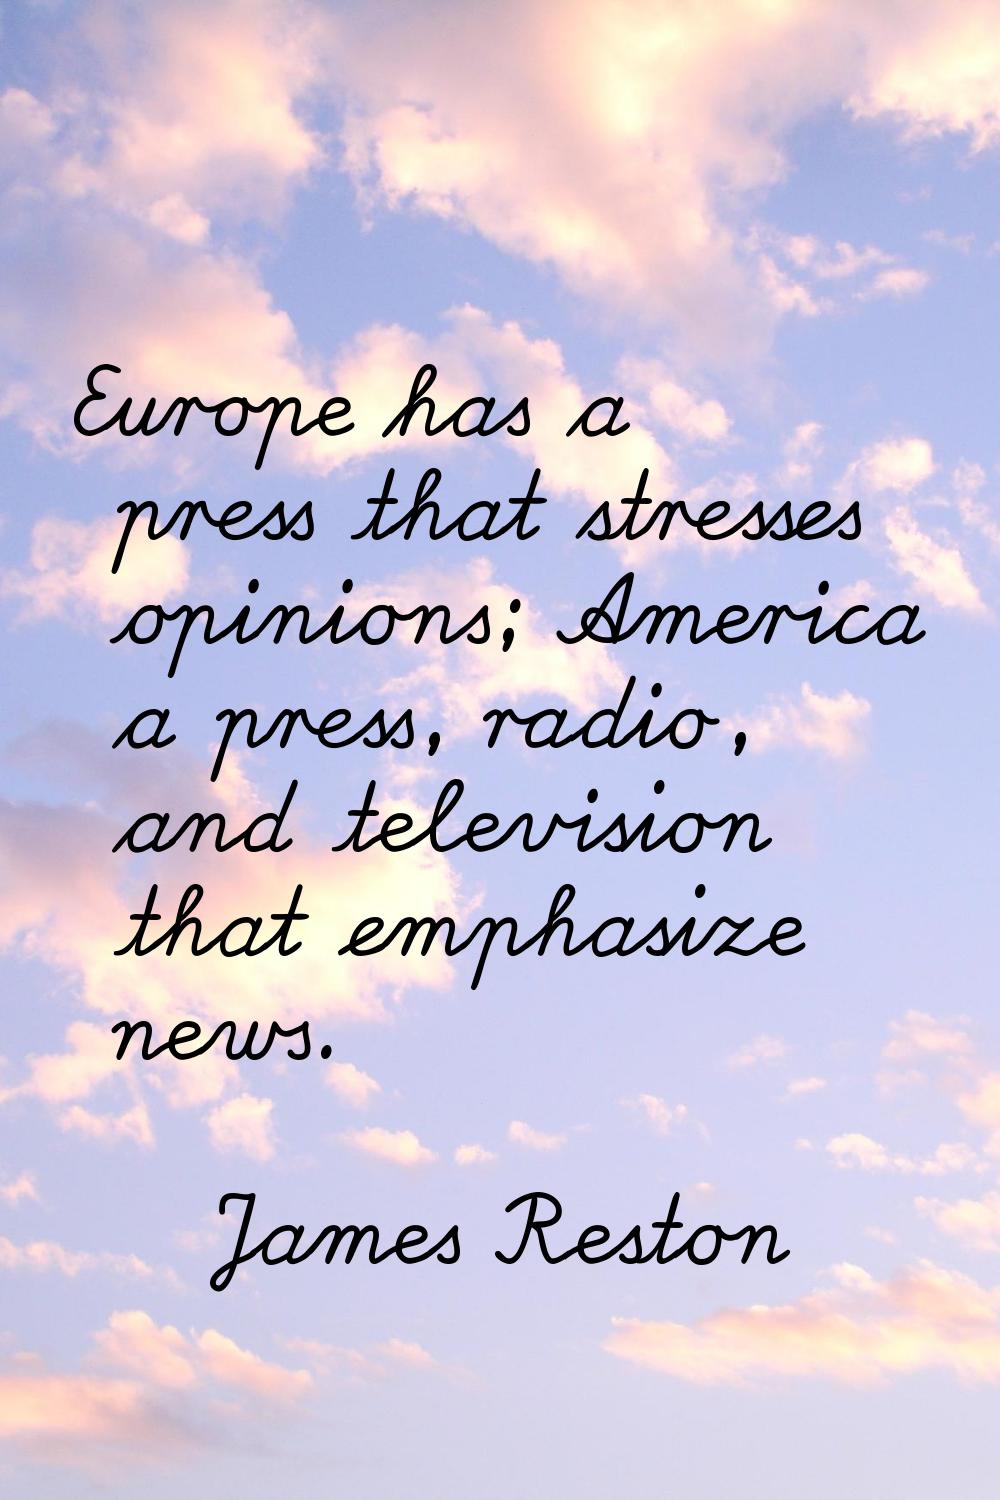 Europe has a press that stresses opinions; America a press, radio, and television that emphasize ne